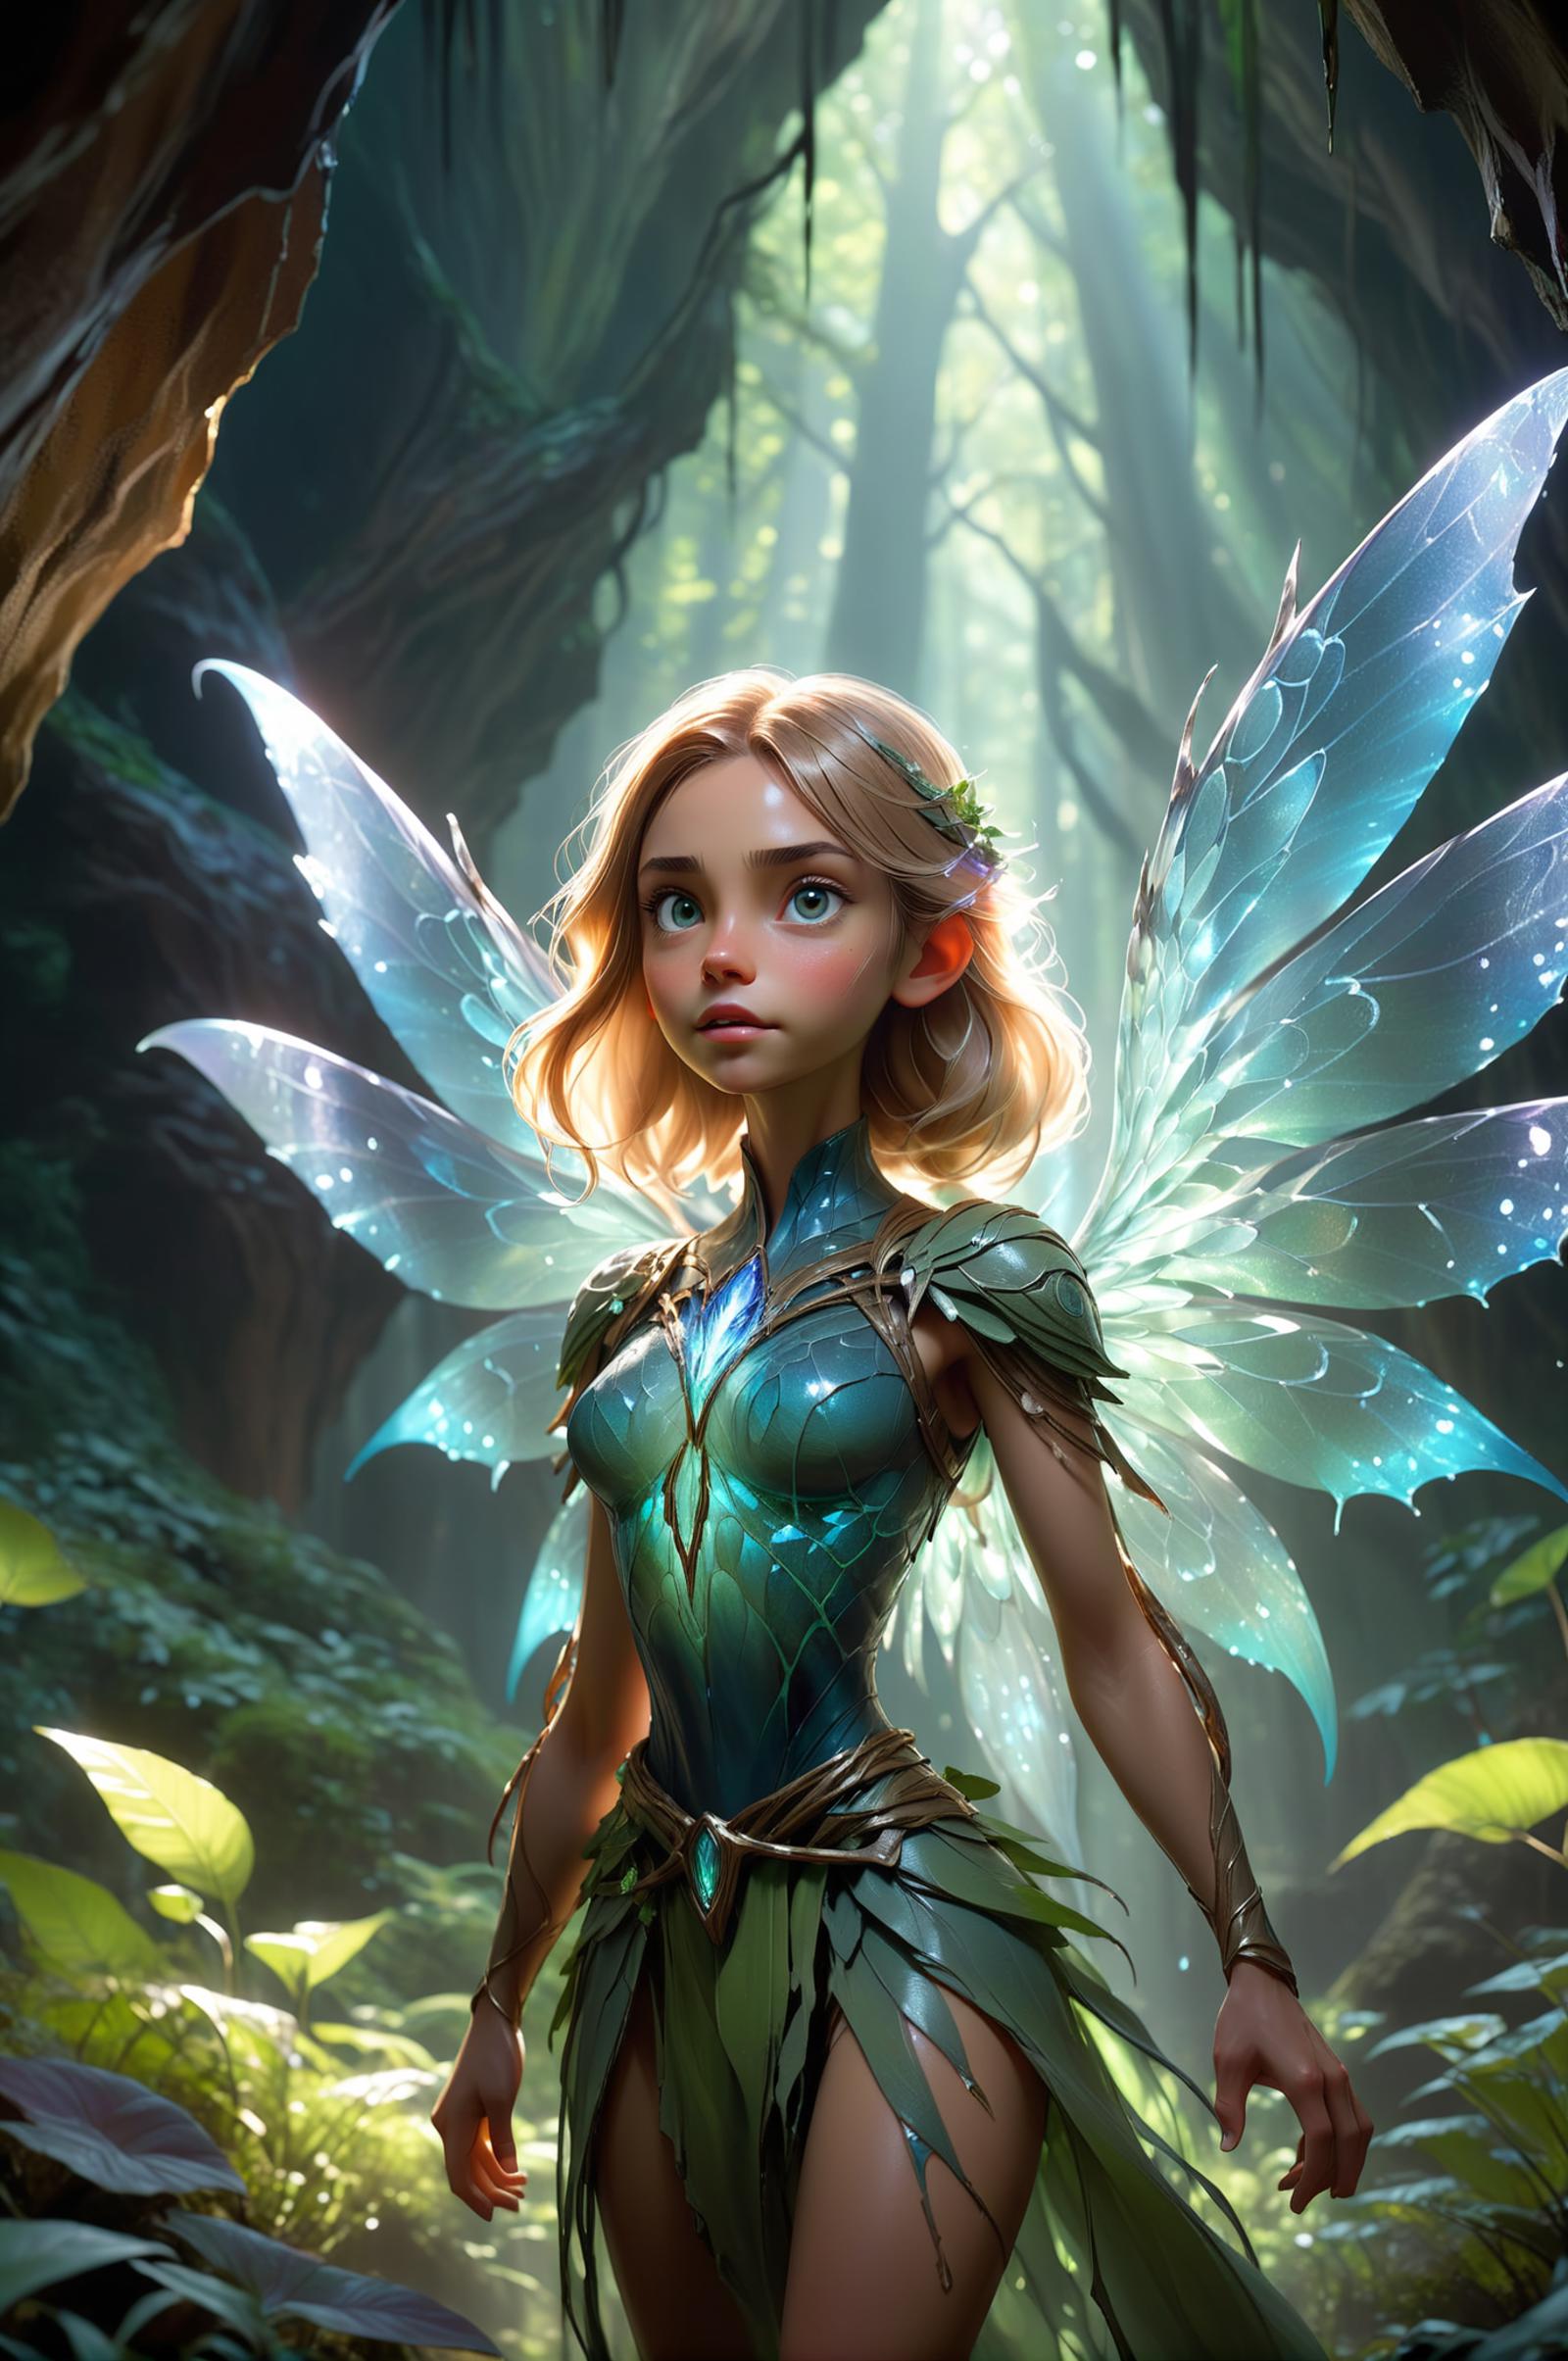 A Tinkerbell-like character in a blue dress, surrounded by greenery.